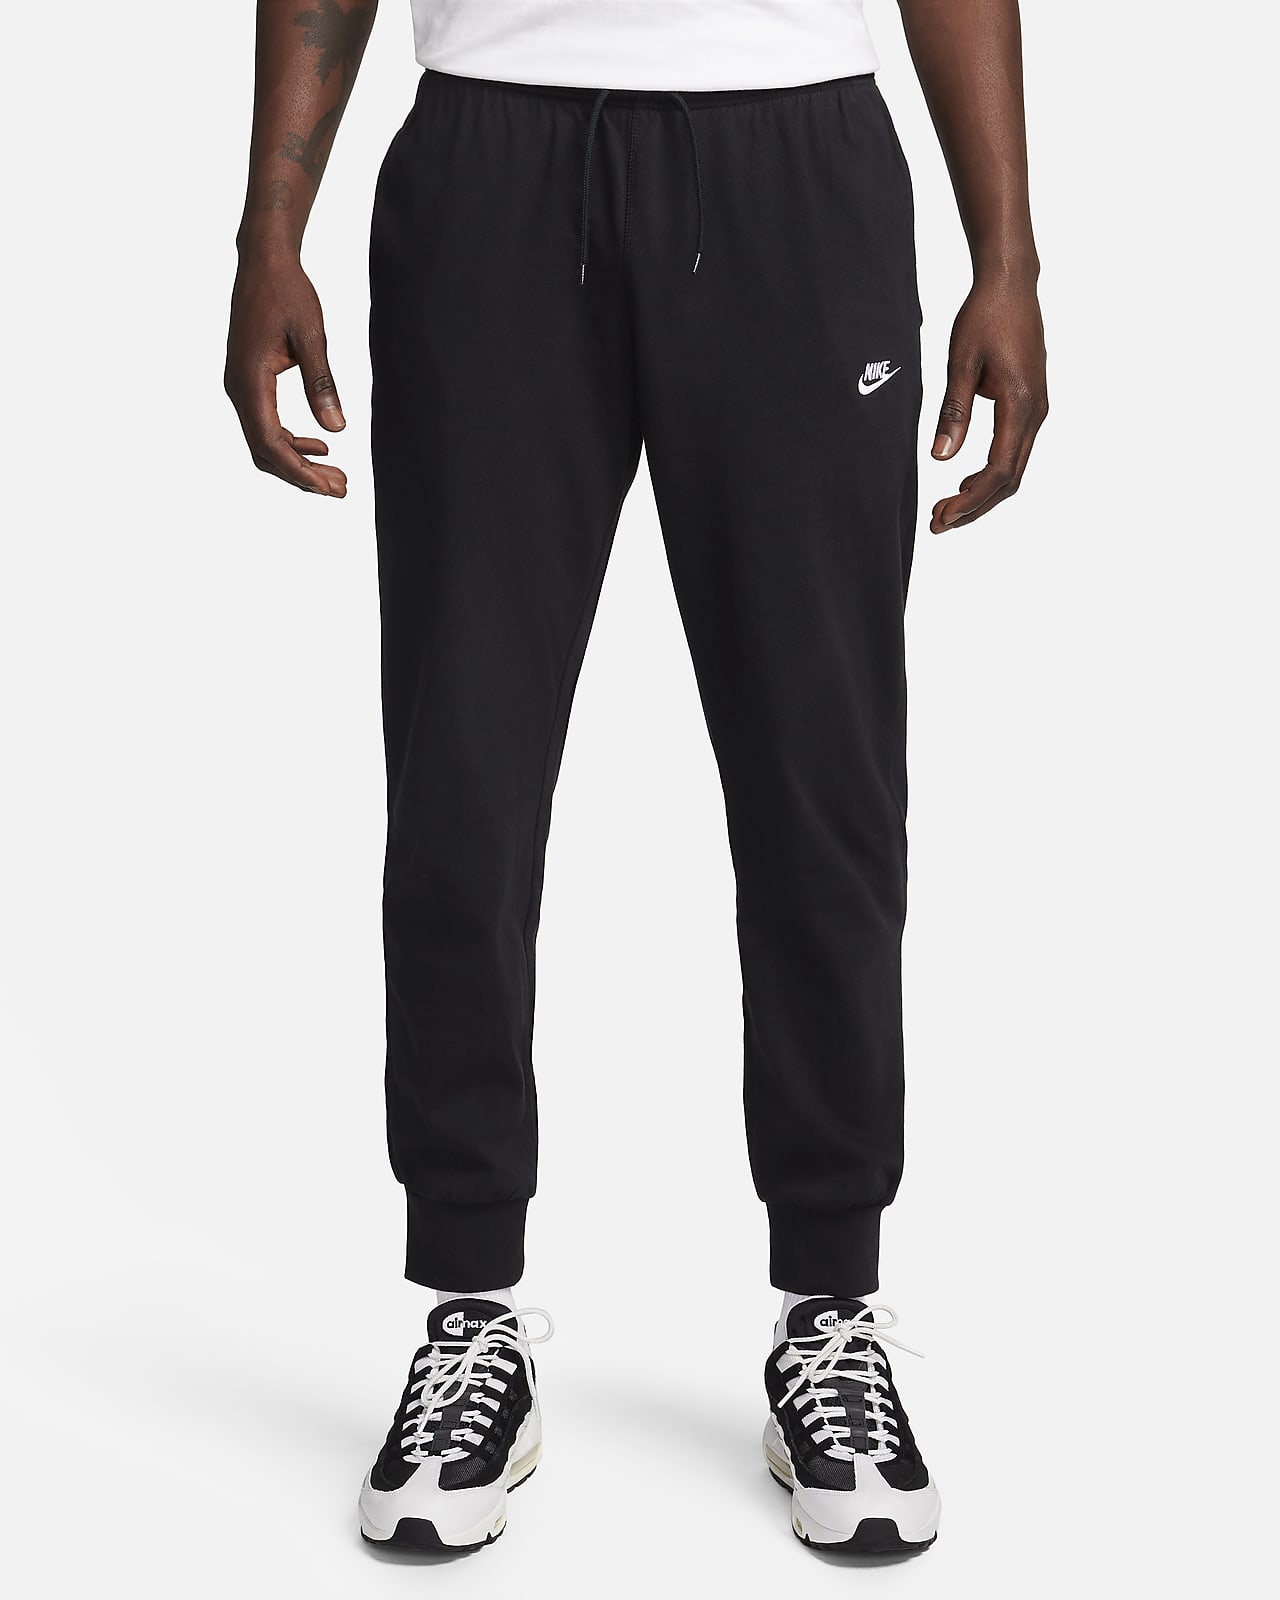 https://static.nike.com/a/images/t_PDP_1280_v1/f_auto,q_auto:eco/868eb33f-4676-466b-997f-00ddd405d20a/club-knit-joggers-T8HTMF.png